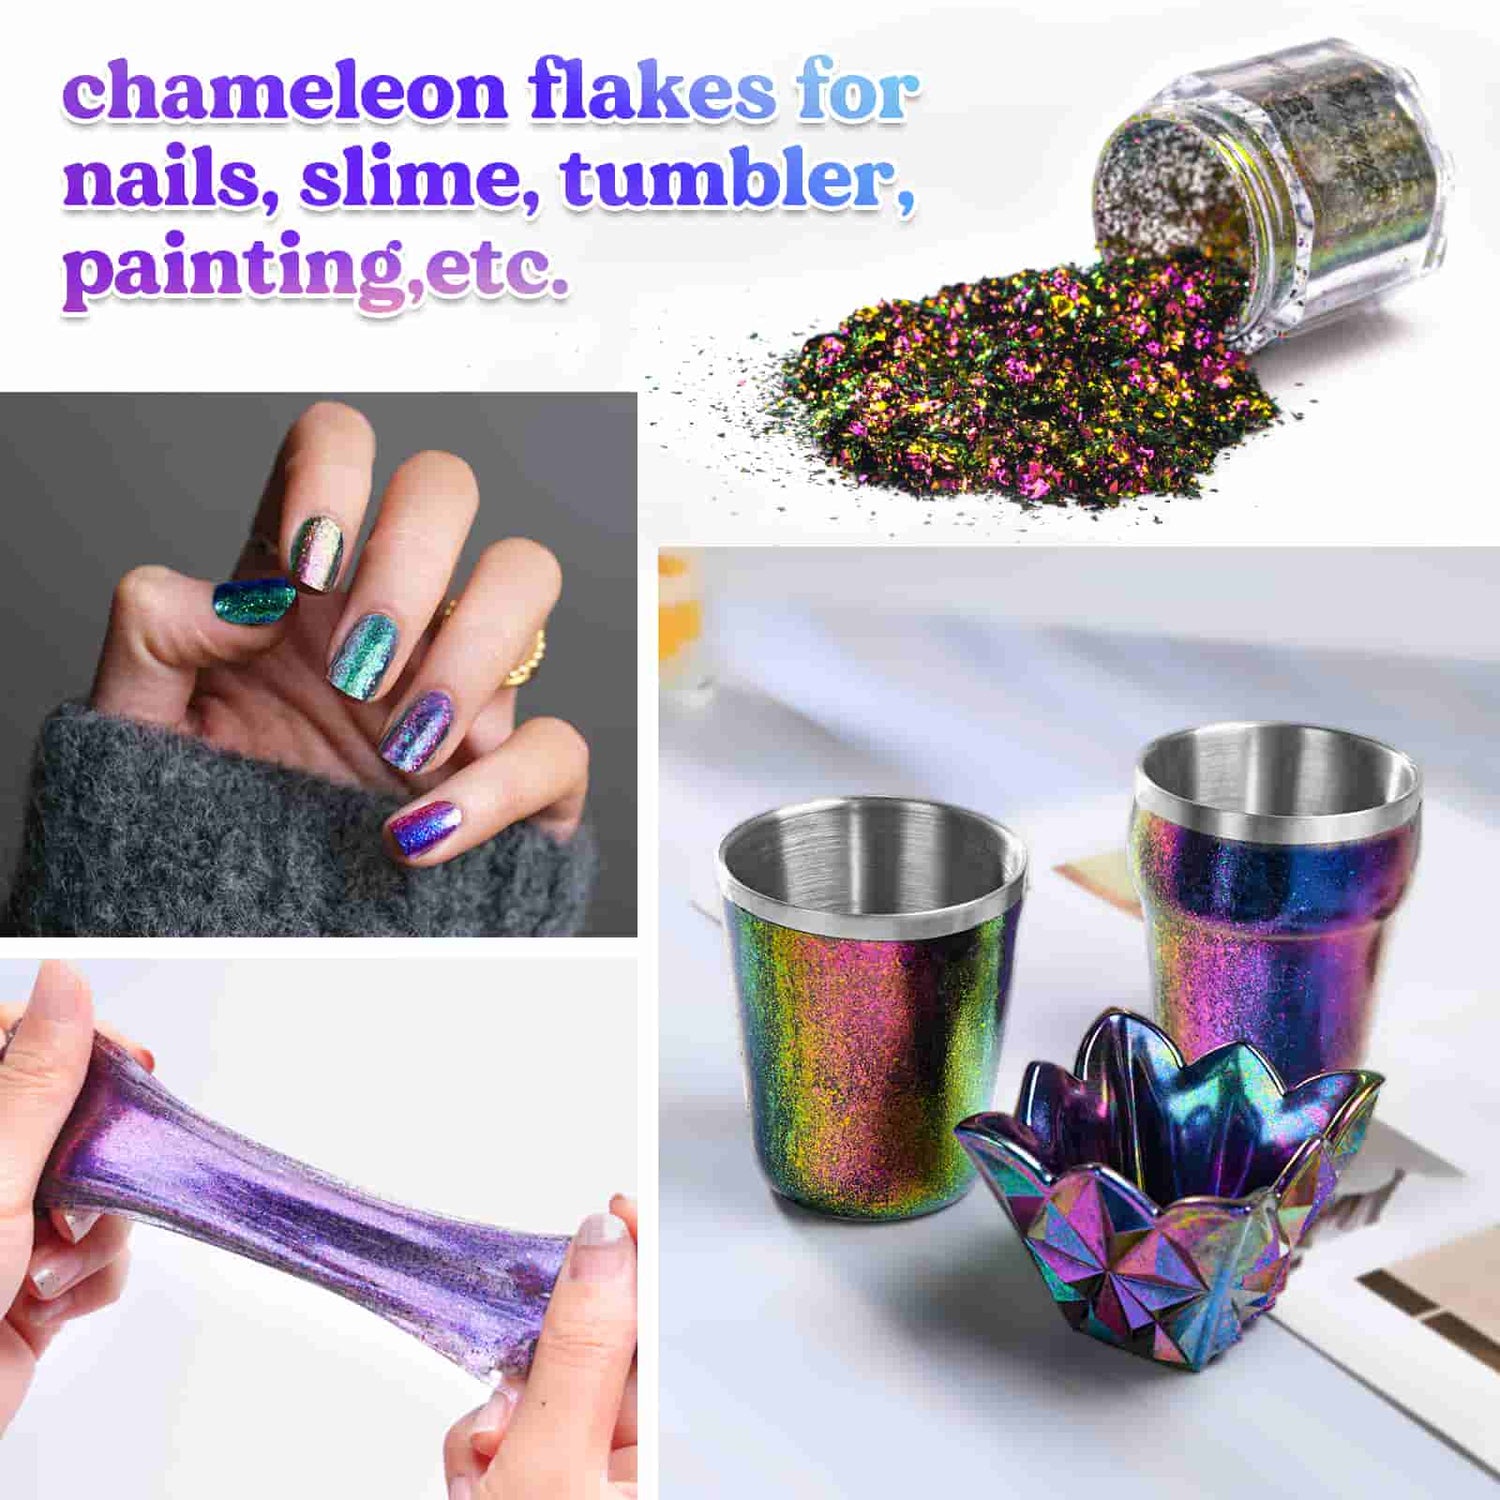 LET'S RESIN Chameleon Powder, 10 Jar Powder for Epoxy Resin/tumbler,  Saturated Color Shifting Chrome Pigment Powder for Painting,slime,nails 